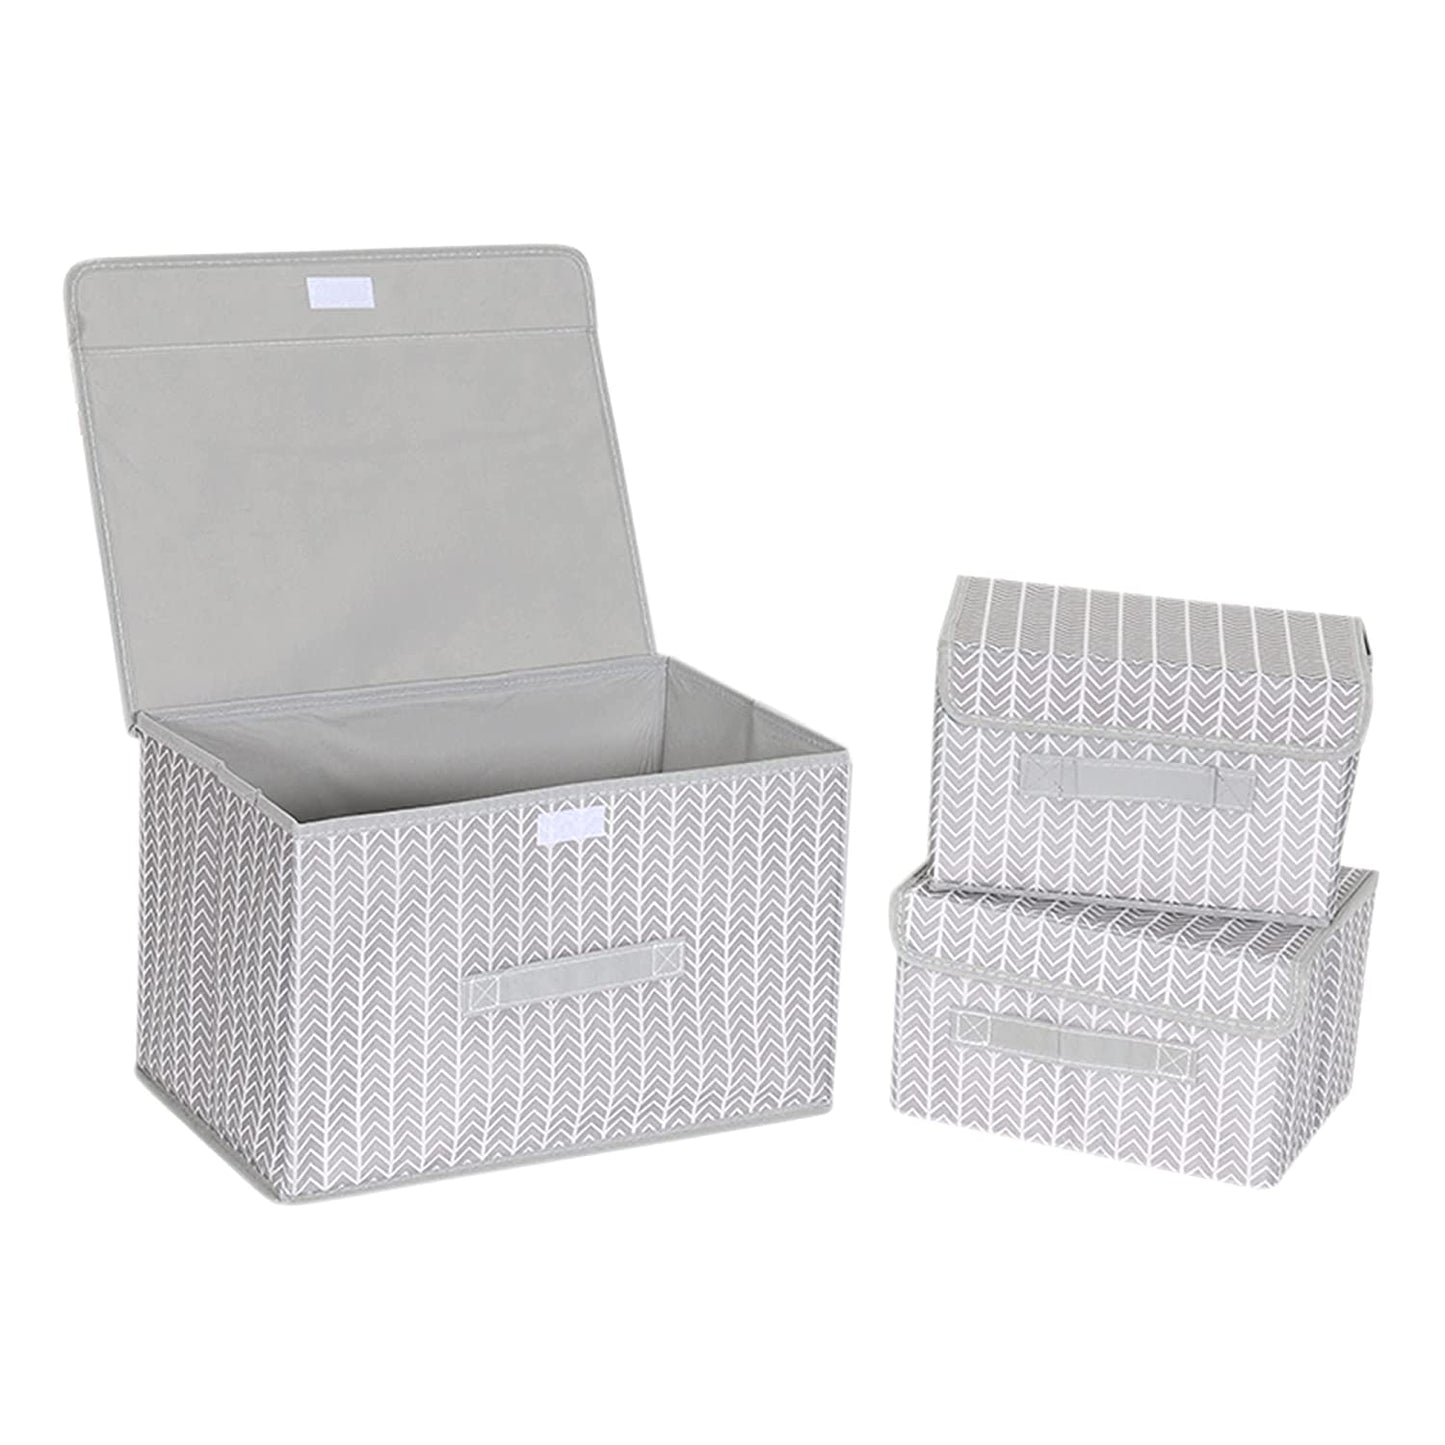 3 Pack Foldable Storage Bin with Lid and Handle